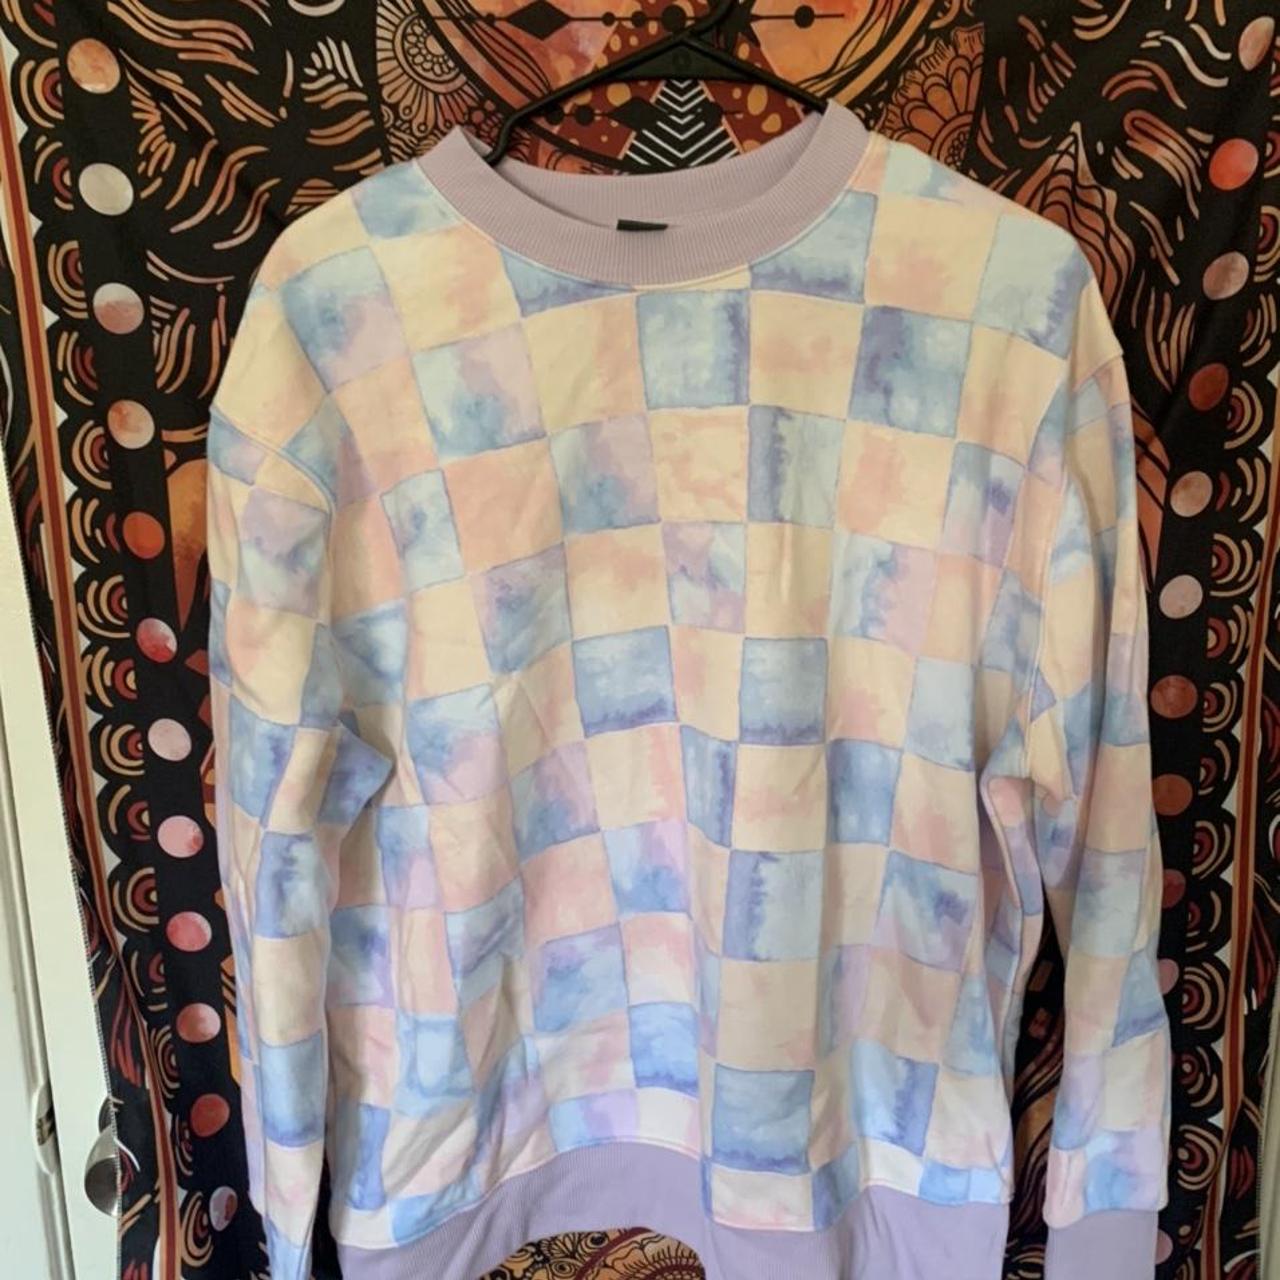 Wild Fable Sweatshirt, Size: Small, Shipping: $8, No